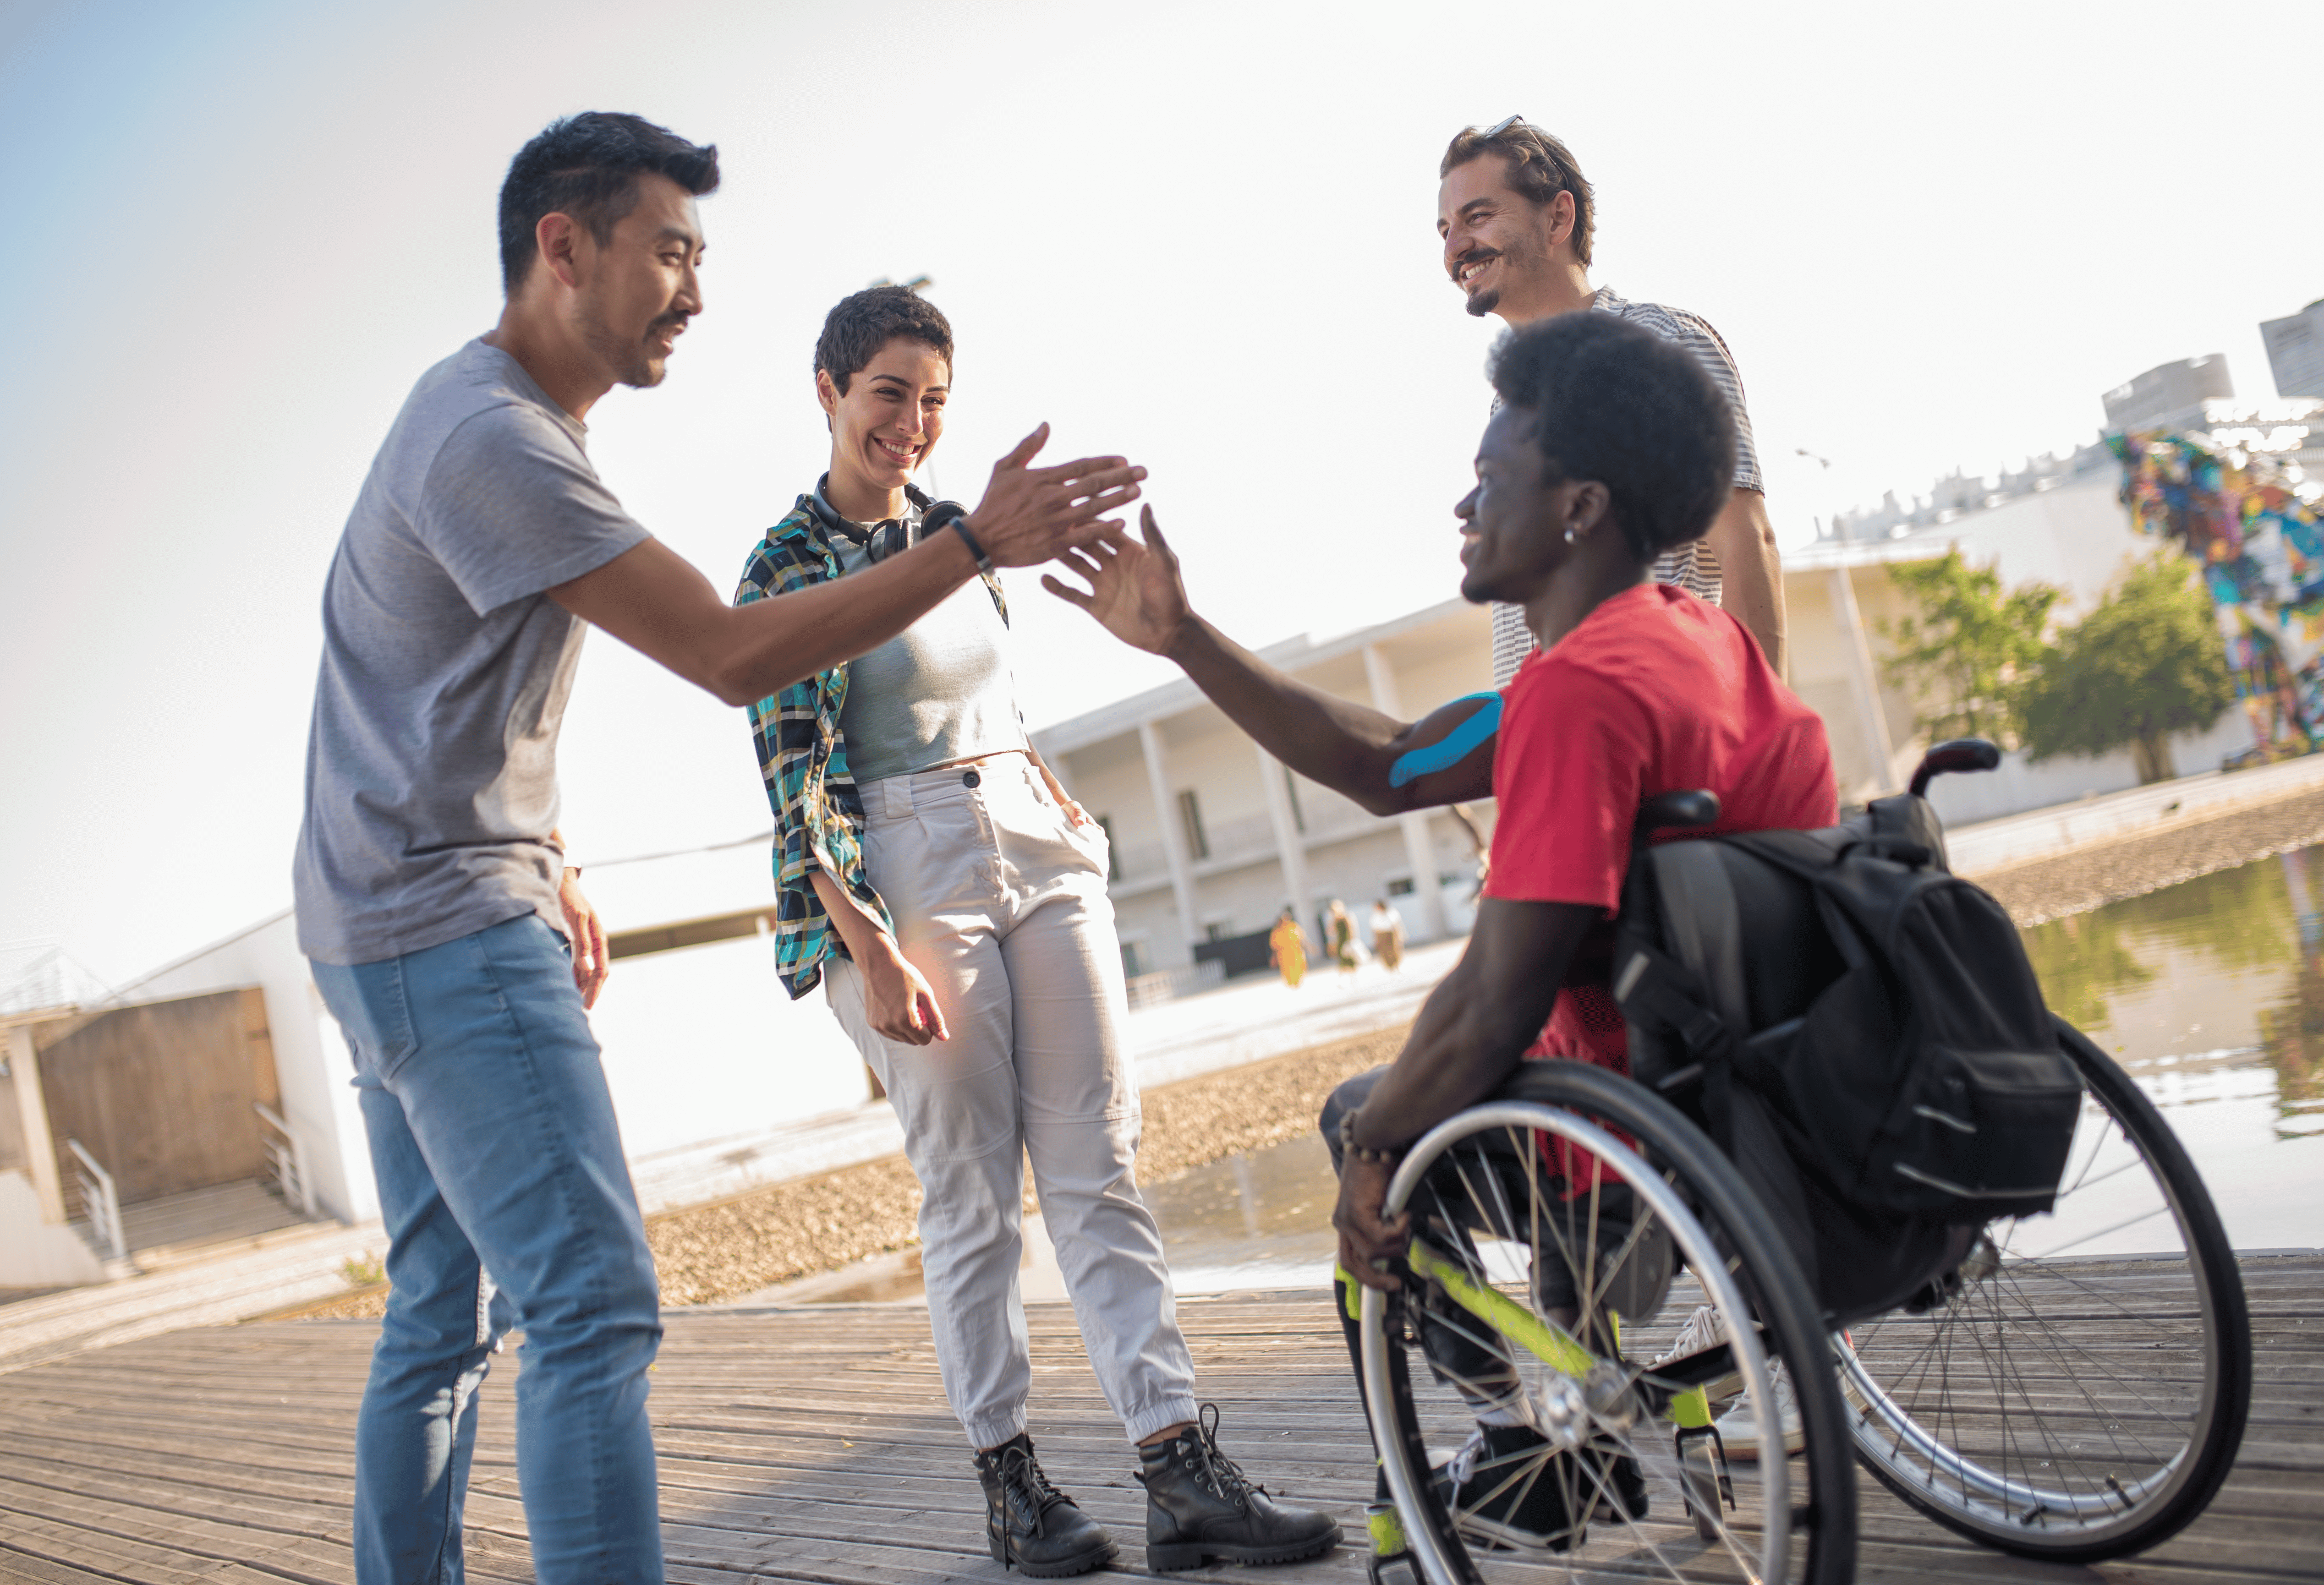 An image of disabled and able-bodied people working together.